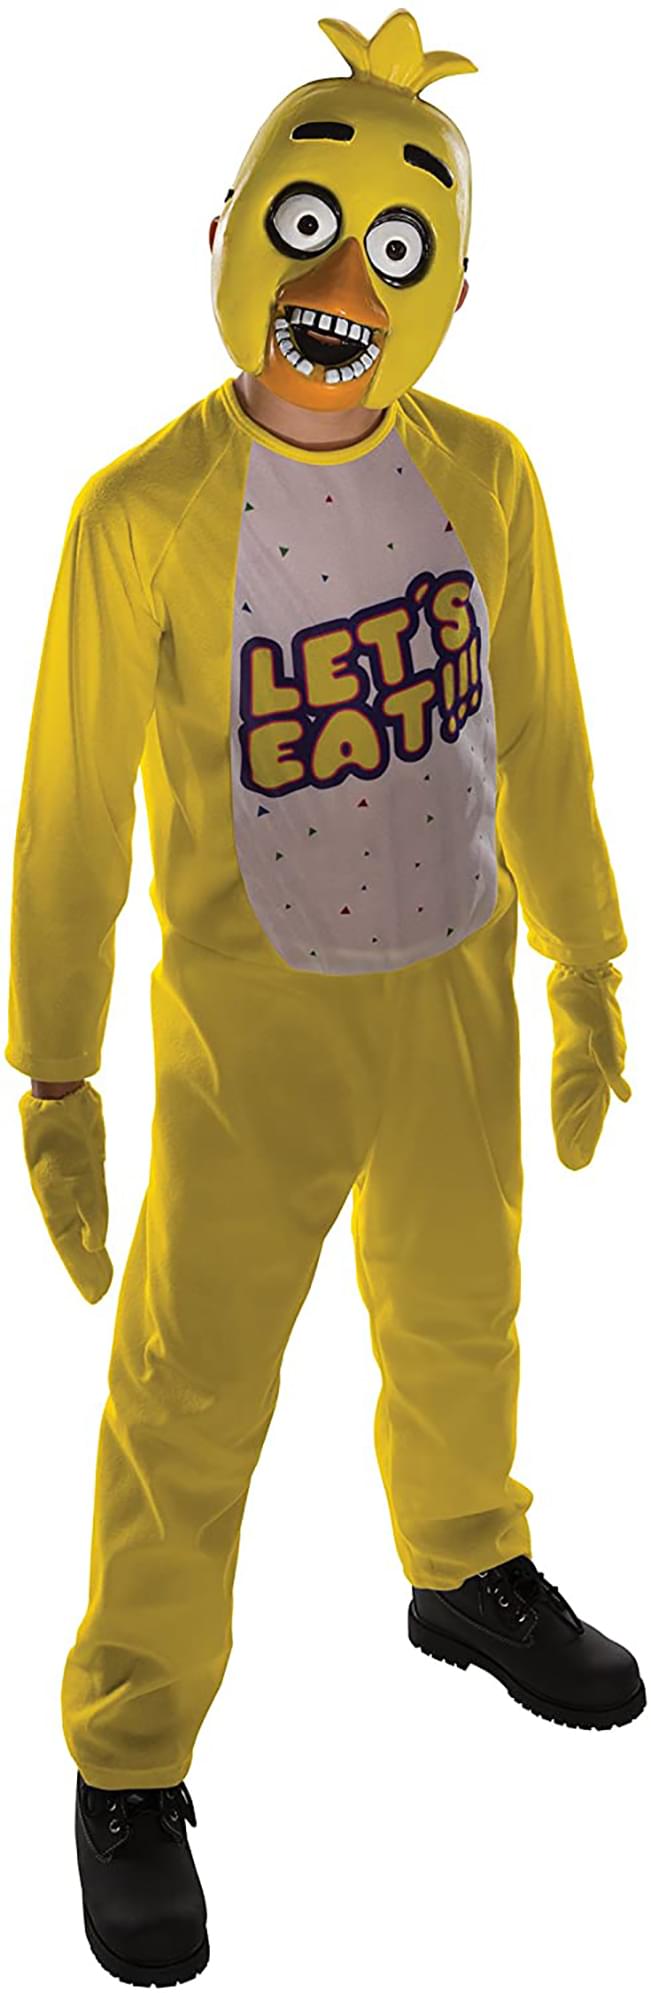 Five Nights at Freddy's Chica Costume Child